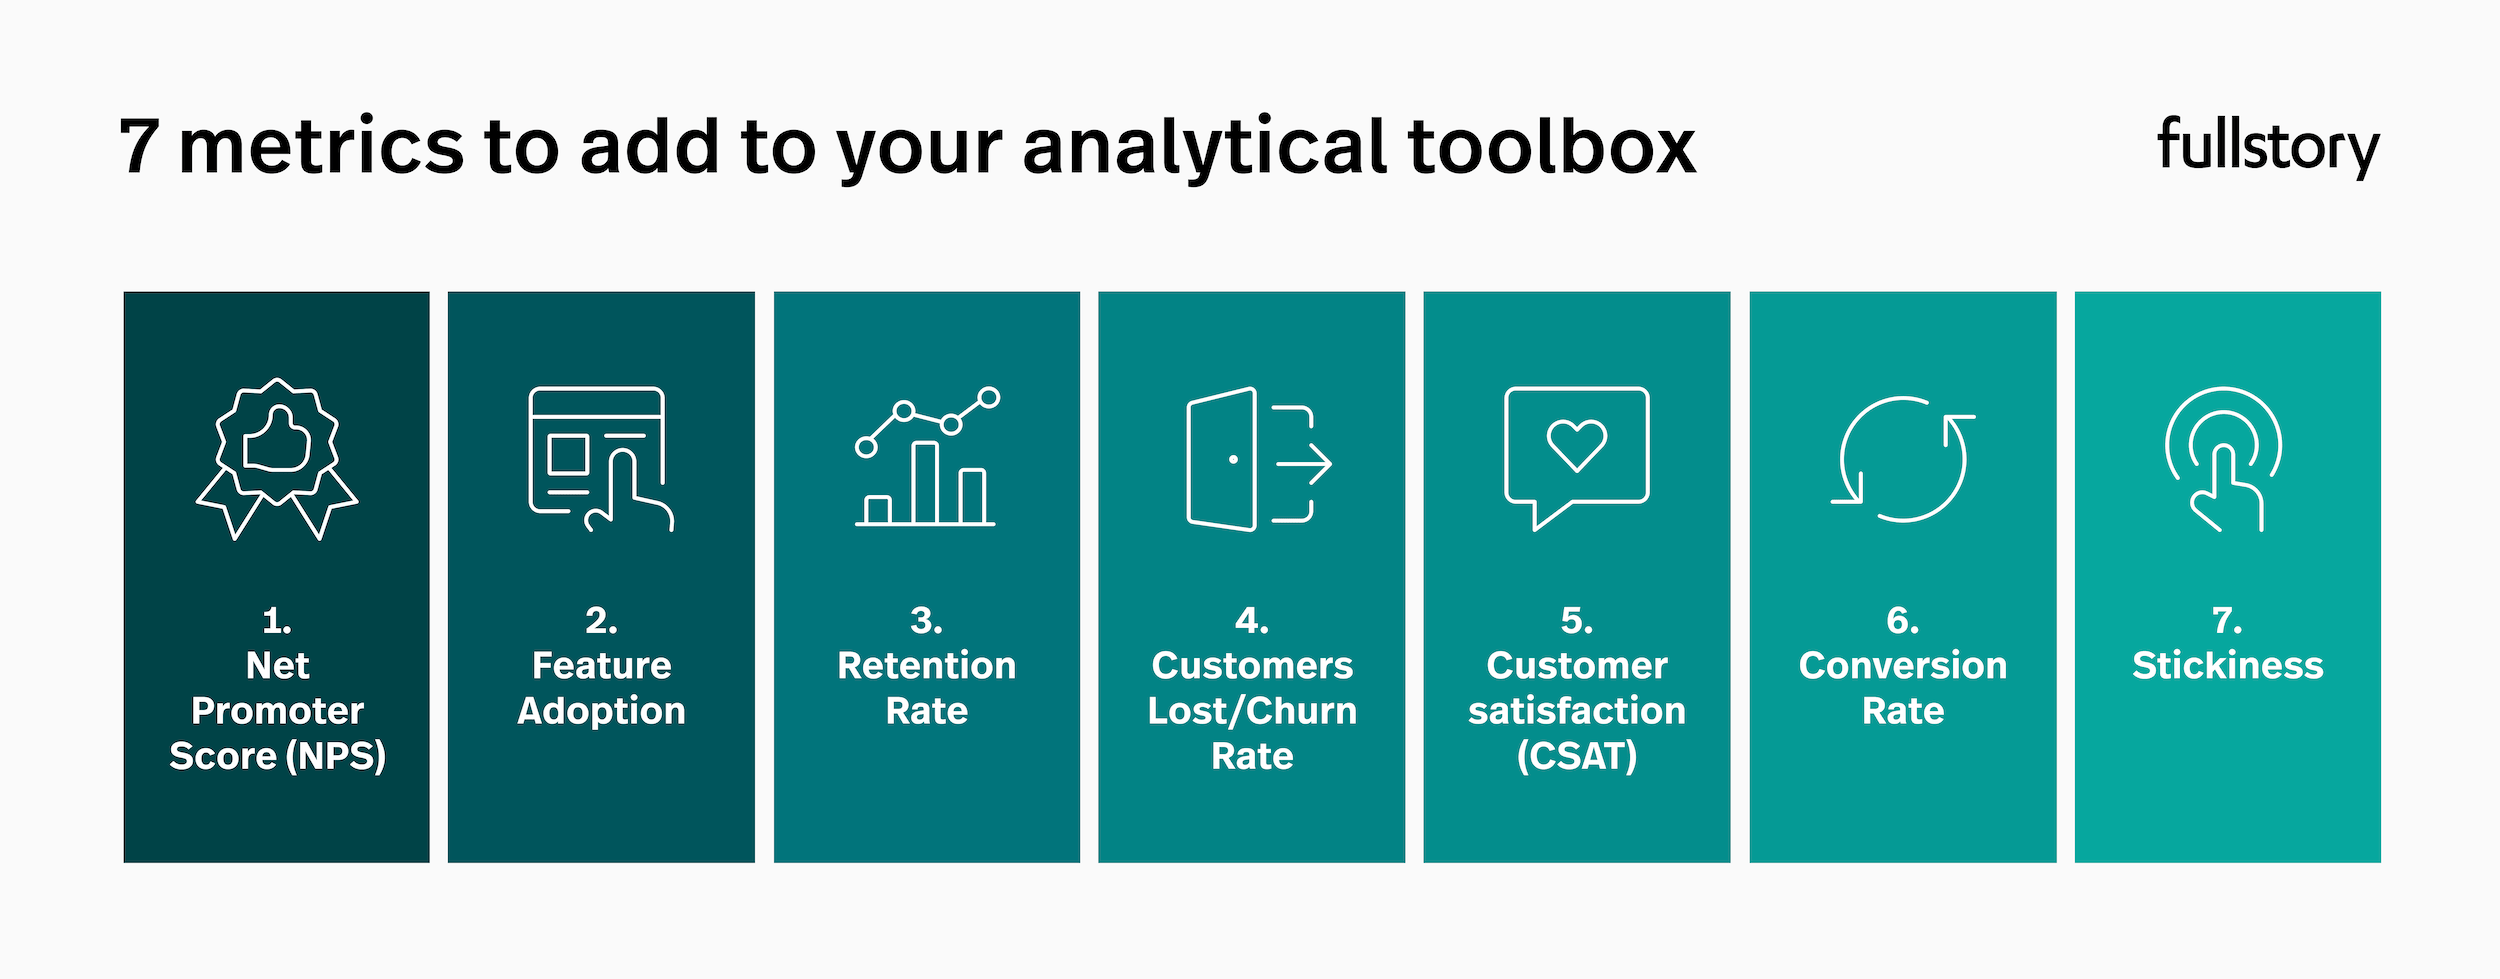 7 metrics to add to your analytical toolbox